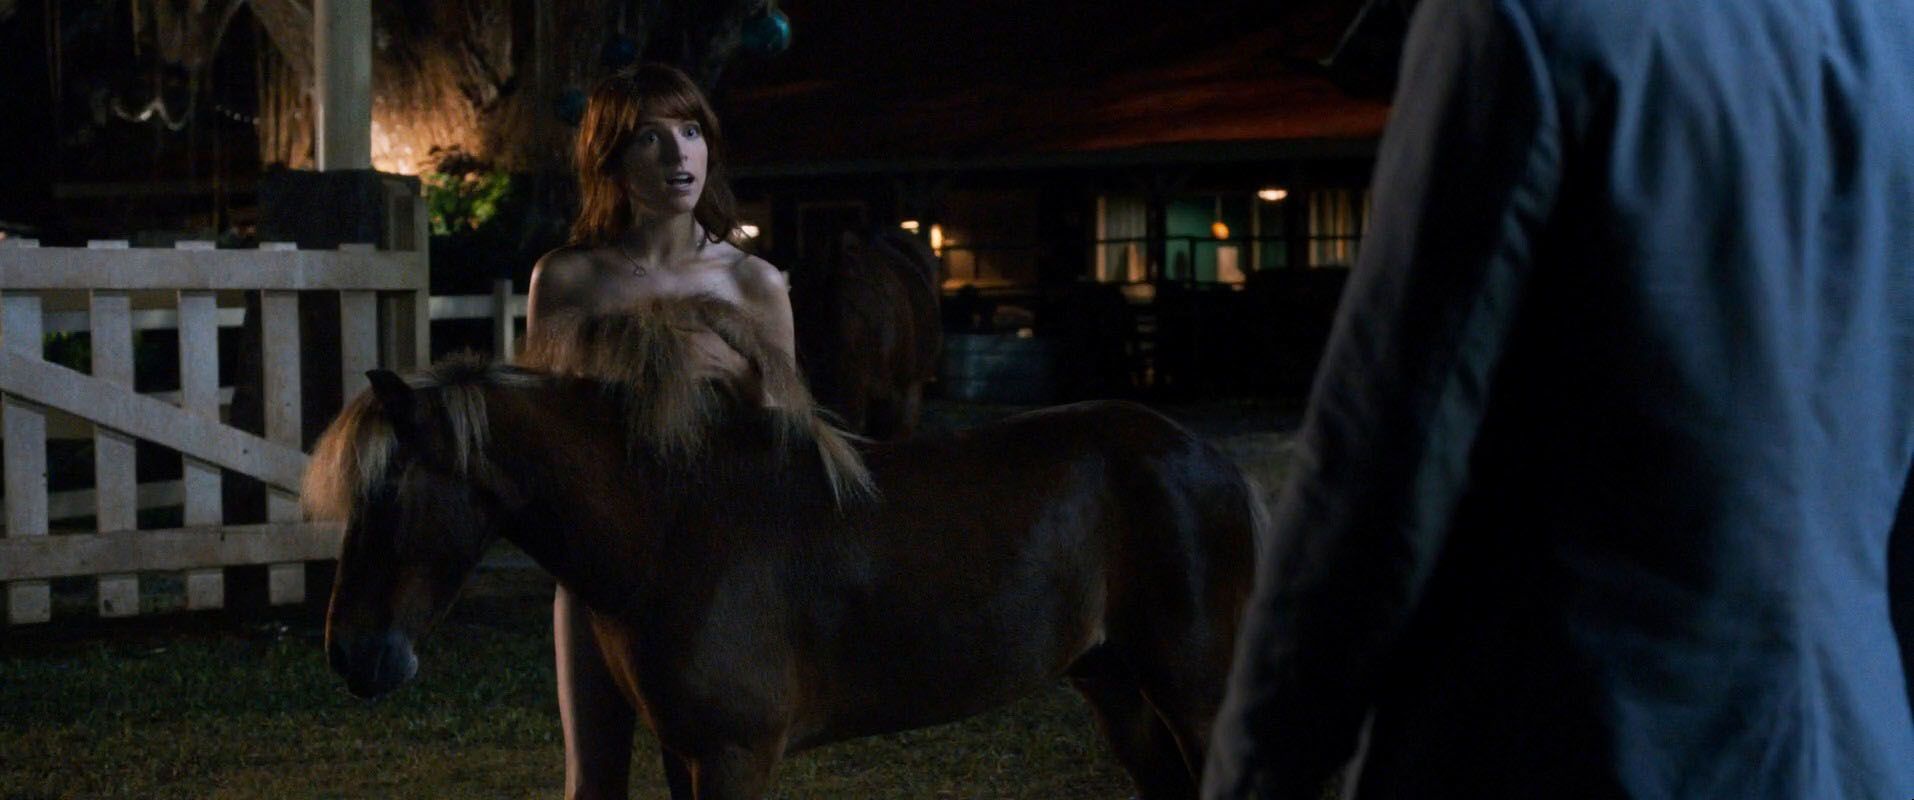 Nude Anna Kendrick and Aubrey Plaza Flashing Their Boobs and Intriguing Cur...